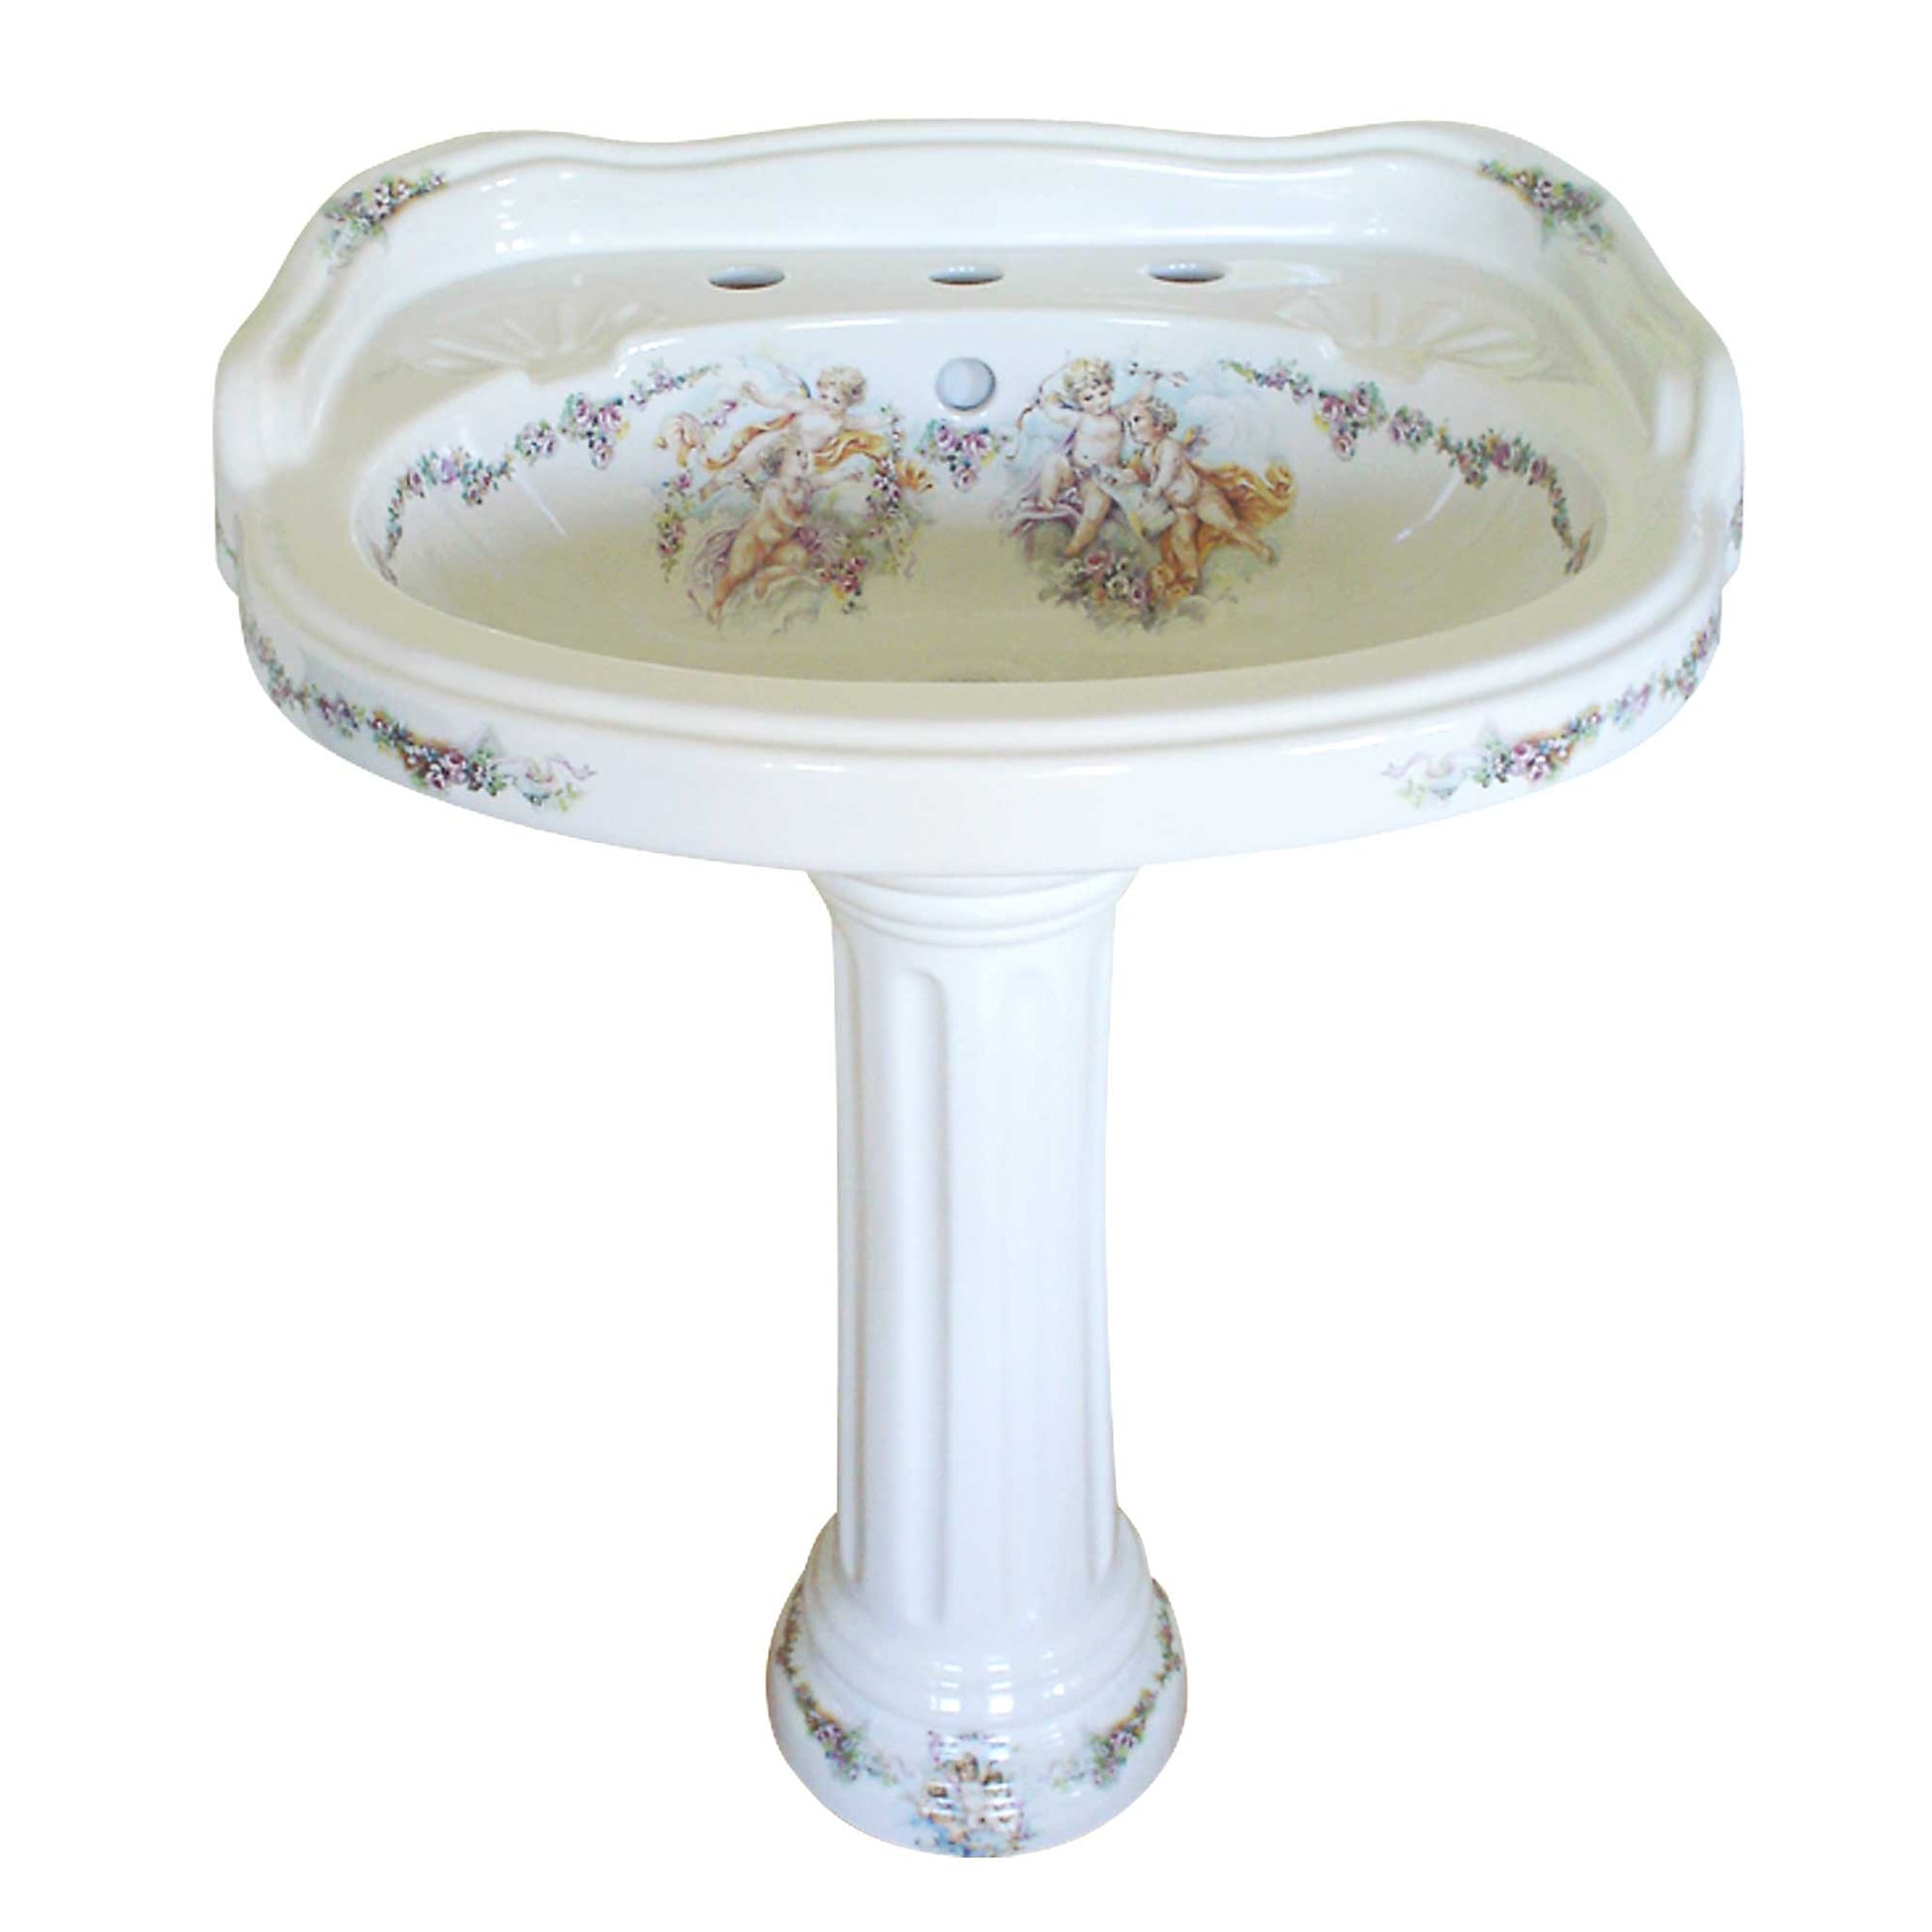 Traditional Pedestal lavatory painted with Cherubs, ribbons and flowers design.